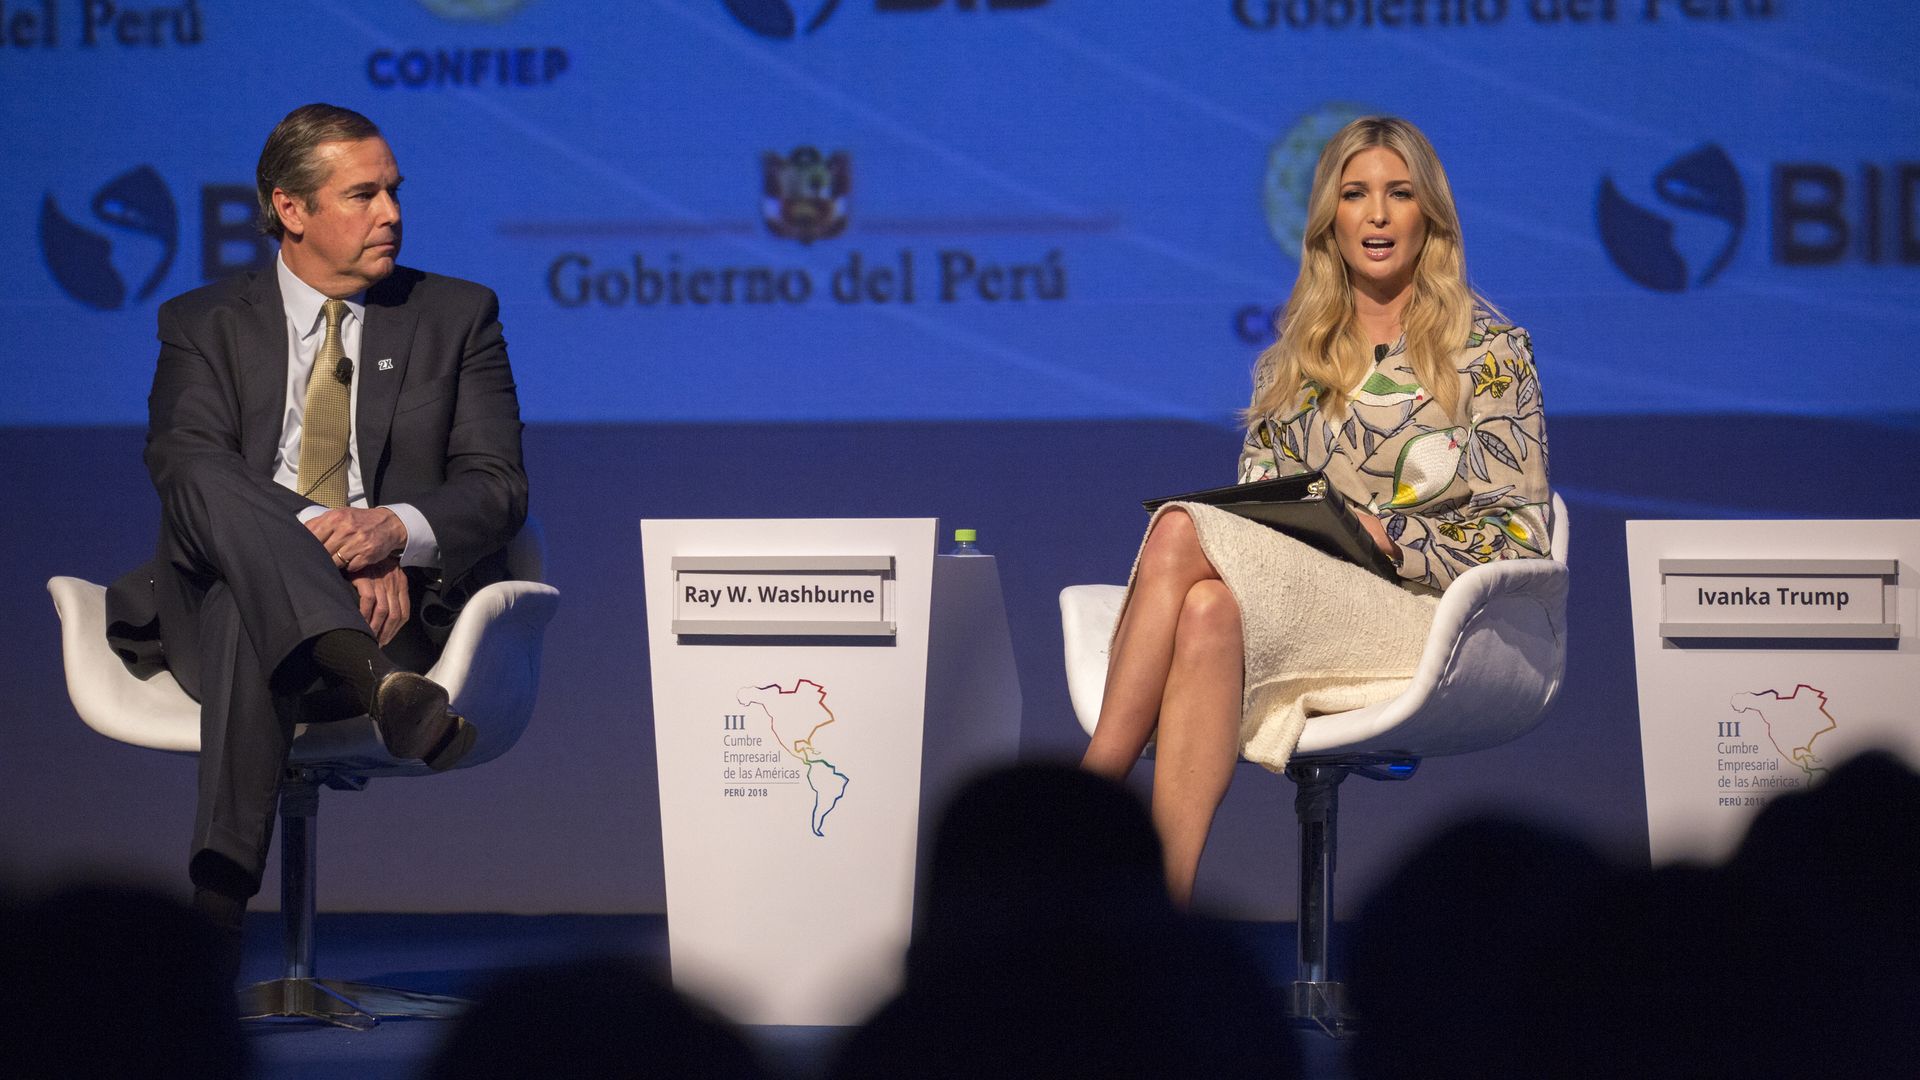 US President and CEO of the Overseas Private Investment Corporation Ray W. Washburne and US Presidential Advisor Ivanka Trump speak